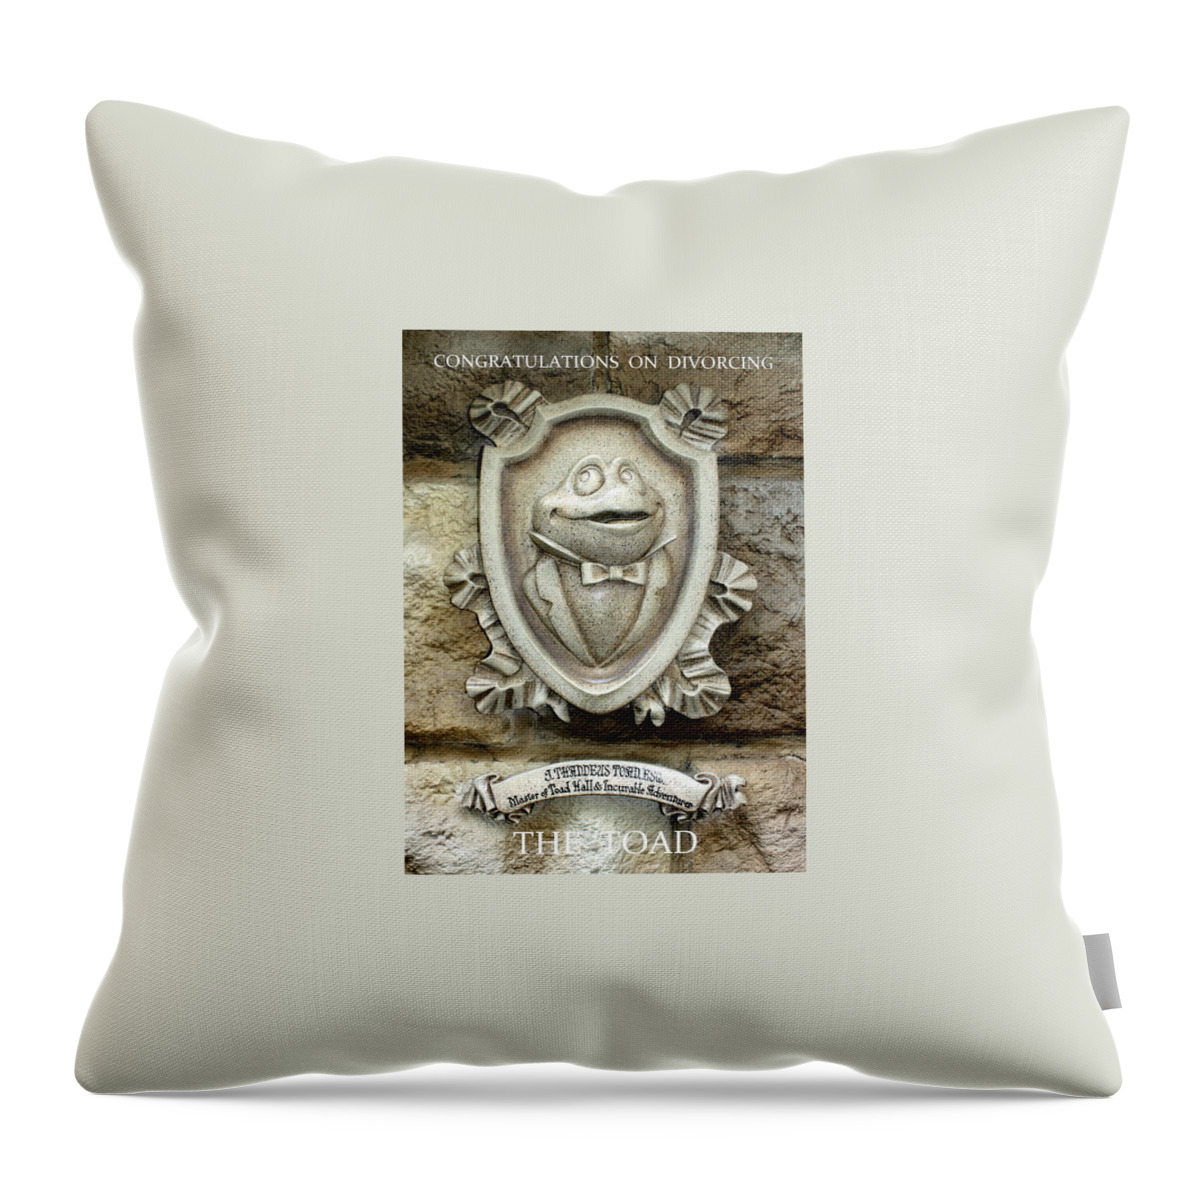 California Throw Pillow featuring the photograph Congrats On Divorcing The Toad by David Nicholls